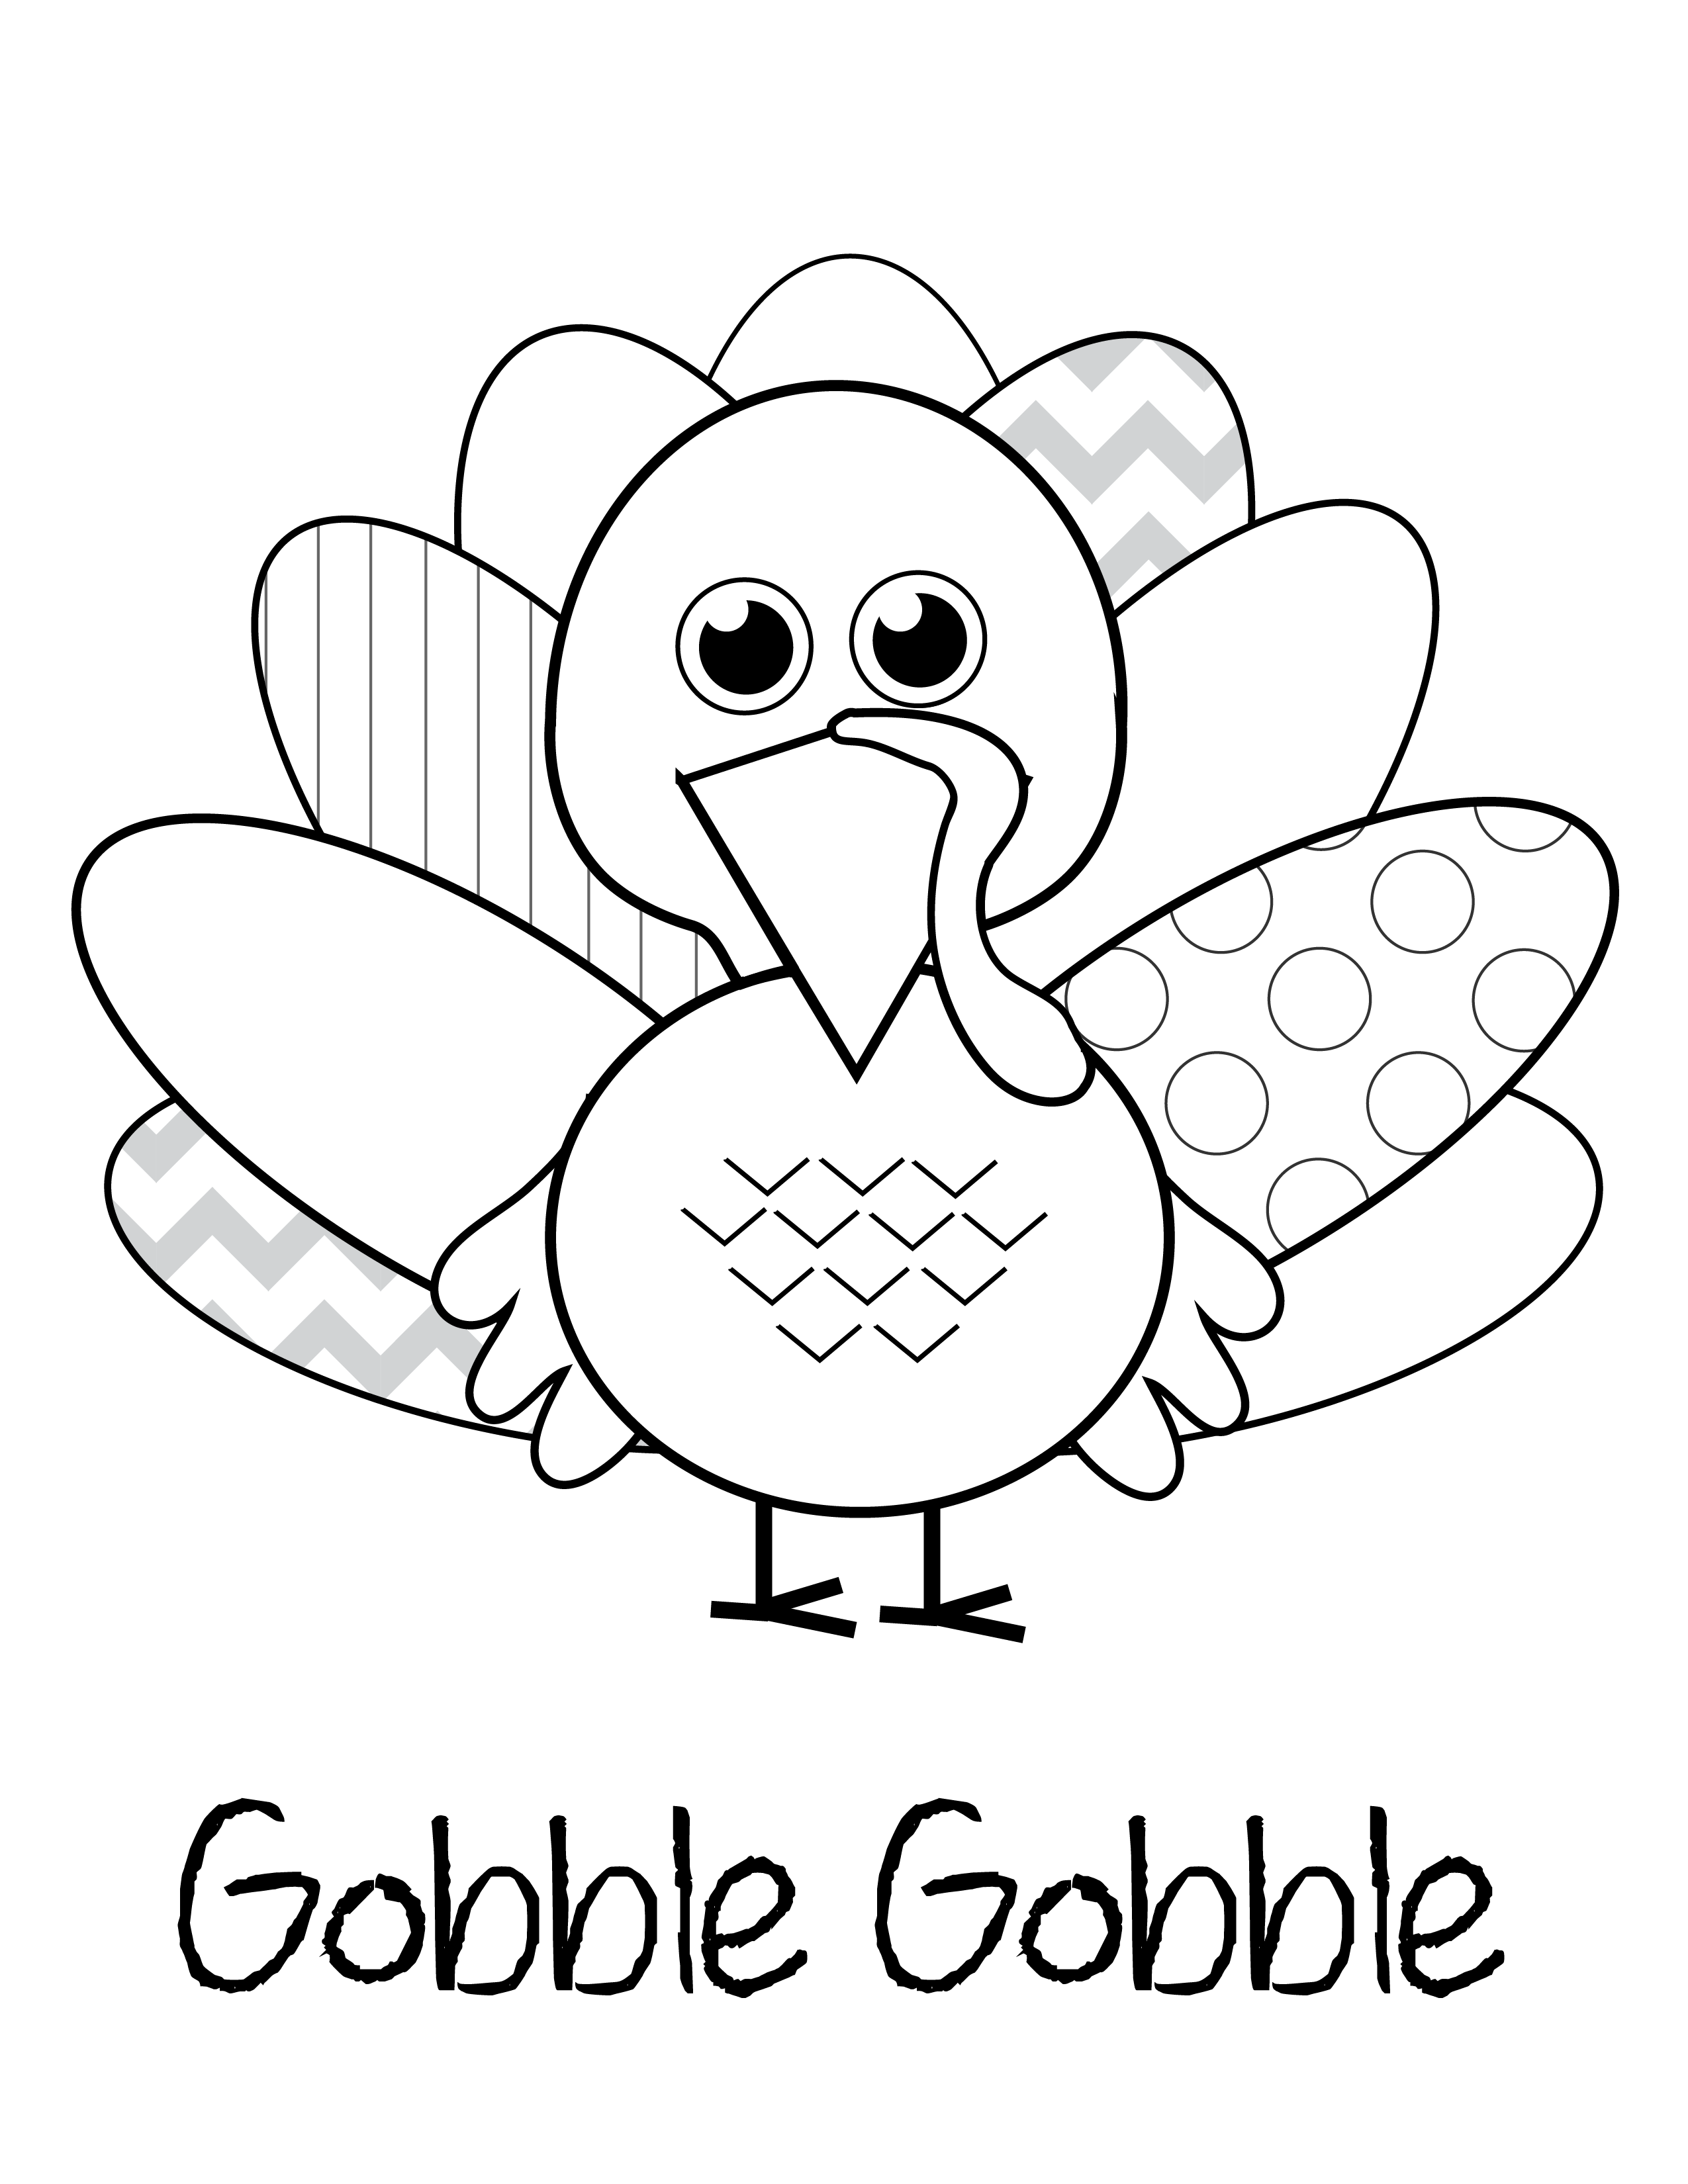 Thanksgiving Coloring Sheets For Preschoolers